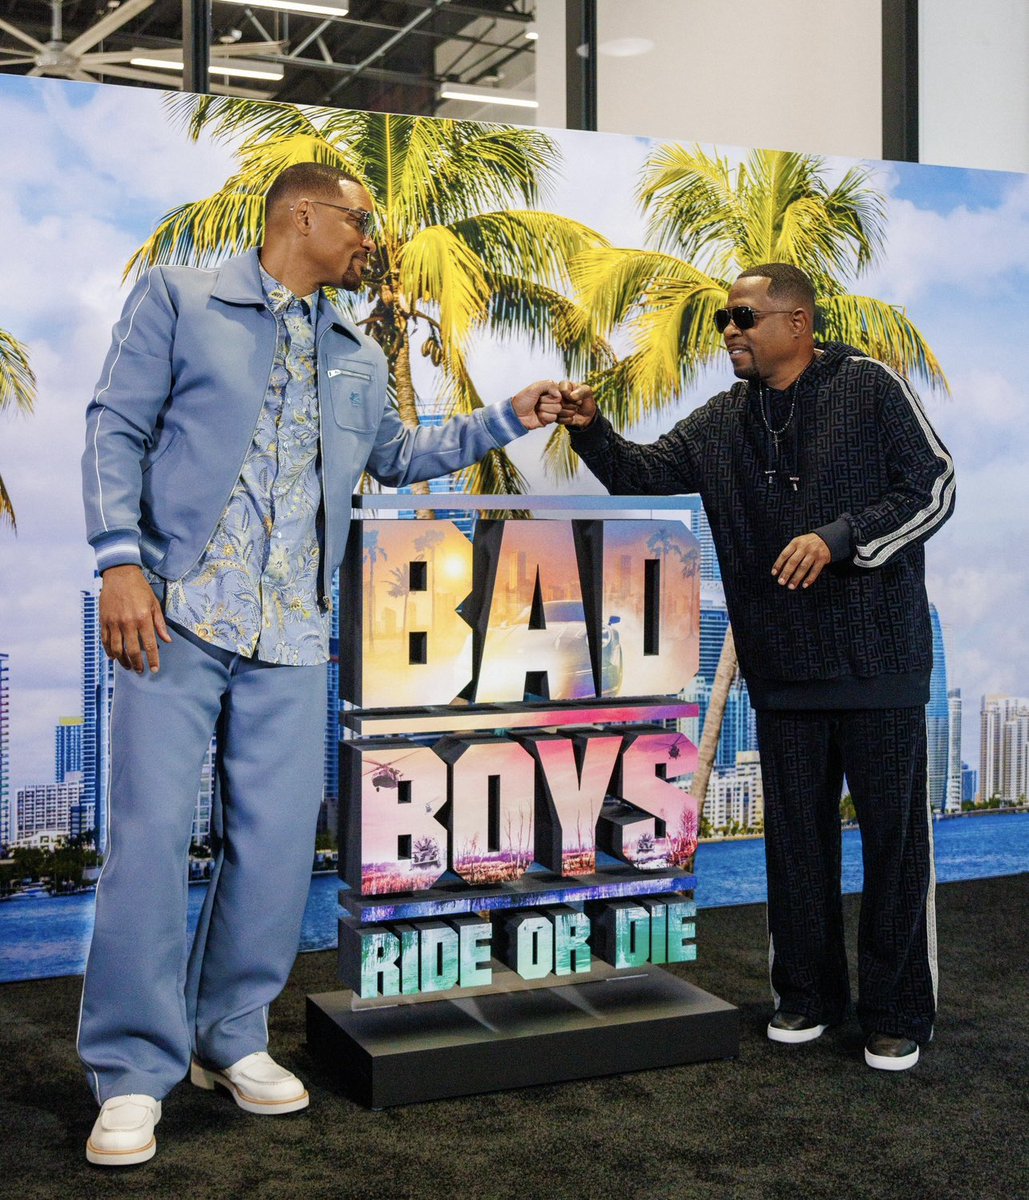 Revving up for @BadBoys: Ride or Die!   We had an adrenaline-packed day at the @PECLA, where guests unleashed their action moves on the track, conquered obstacle courses, and checked out the iconic cars from the movie. Catch the return of Will Smith and Martin Lawrence on June 7!